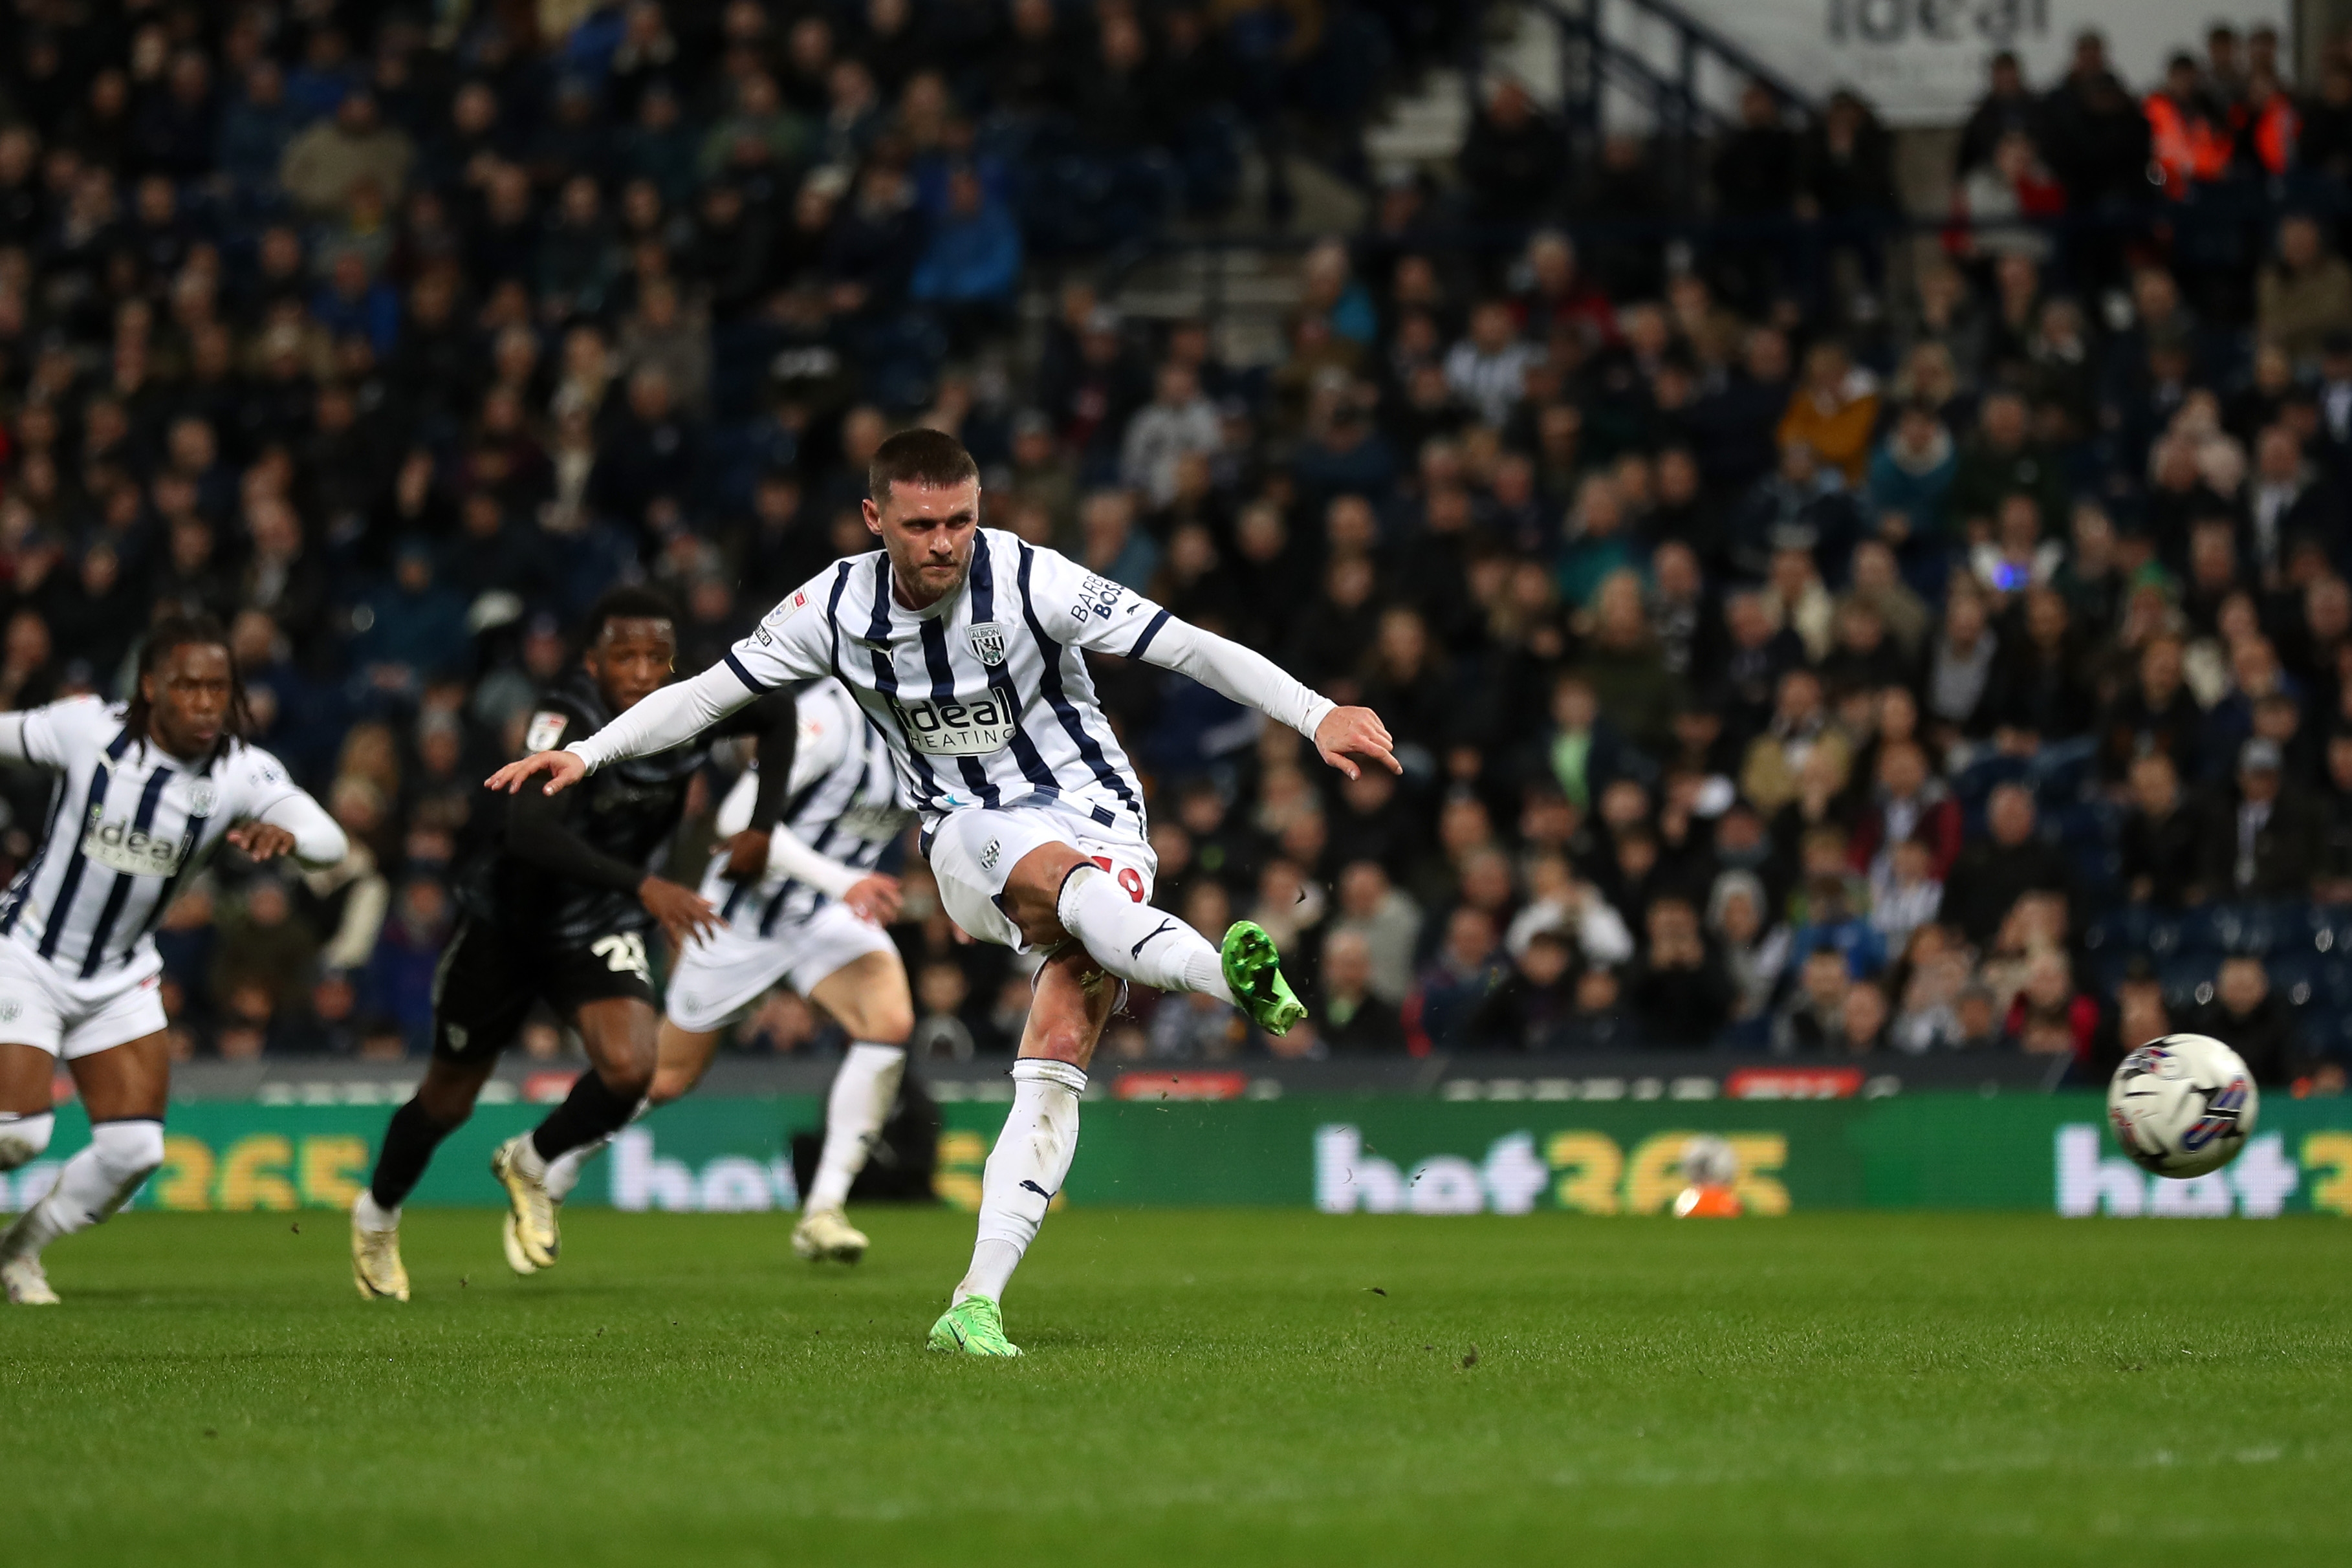 John Swift takes a penalty against Rotherham at The Hawthorns